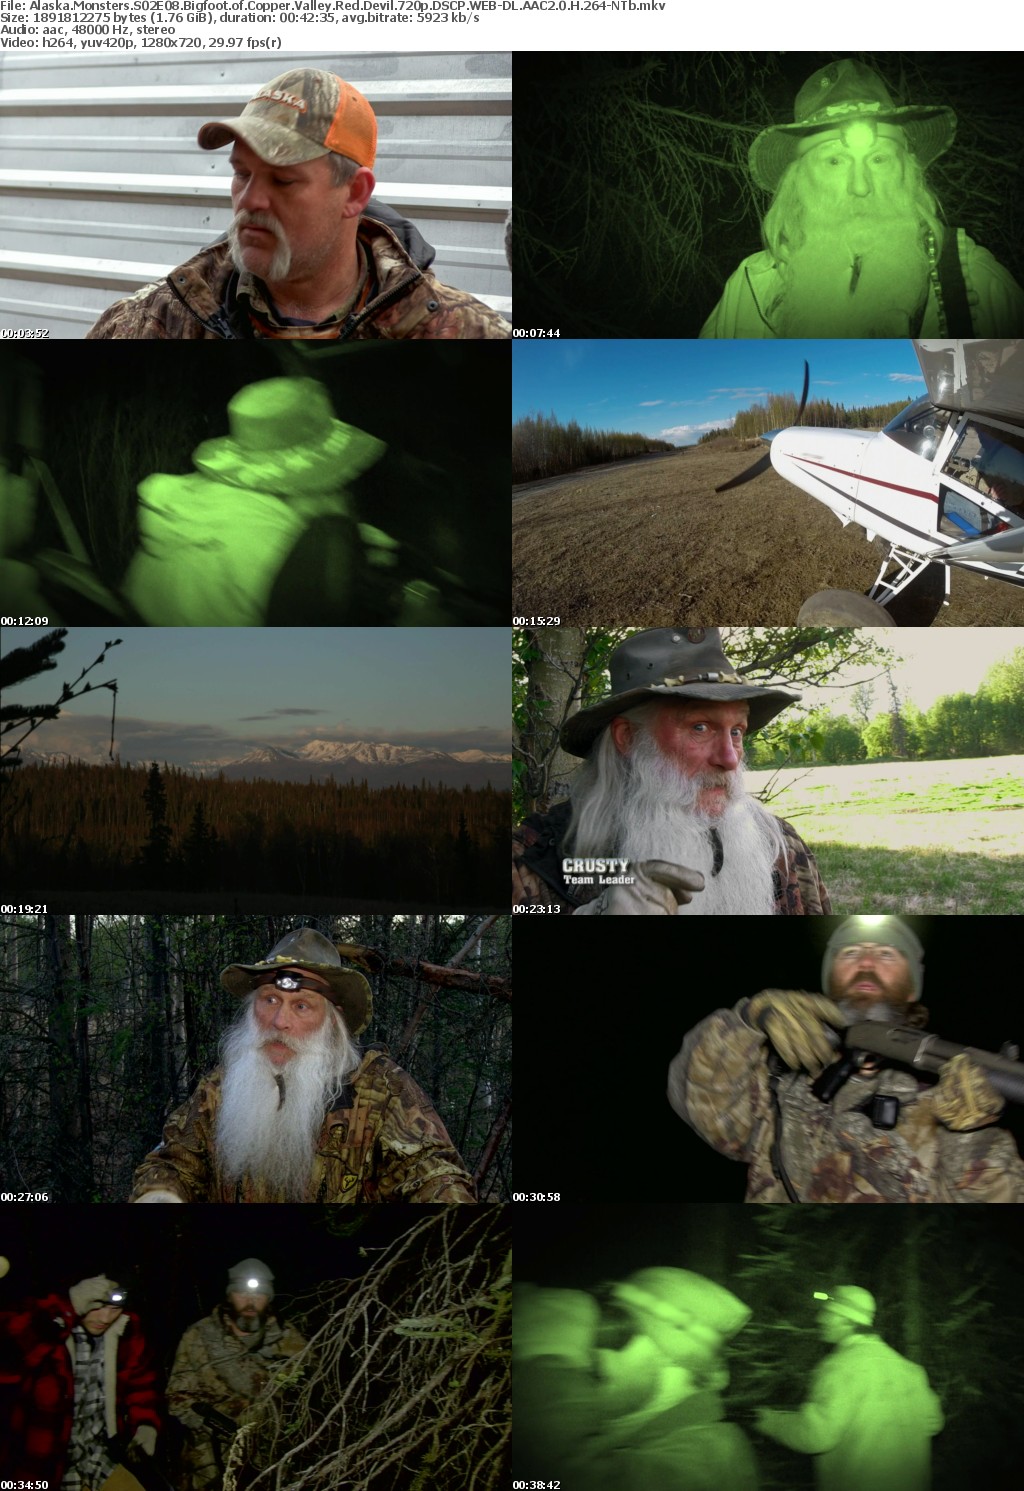 Alaska Monsters S02E08 Bigfoot of Copper Valley Red Devil 720p DSCP WEB-DL AAC2 0 H 264-NTb